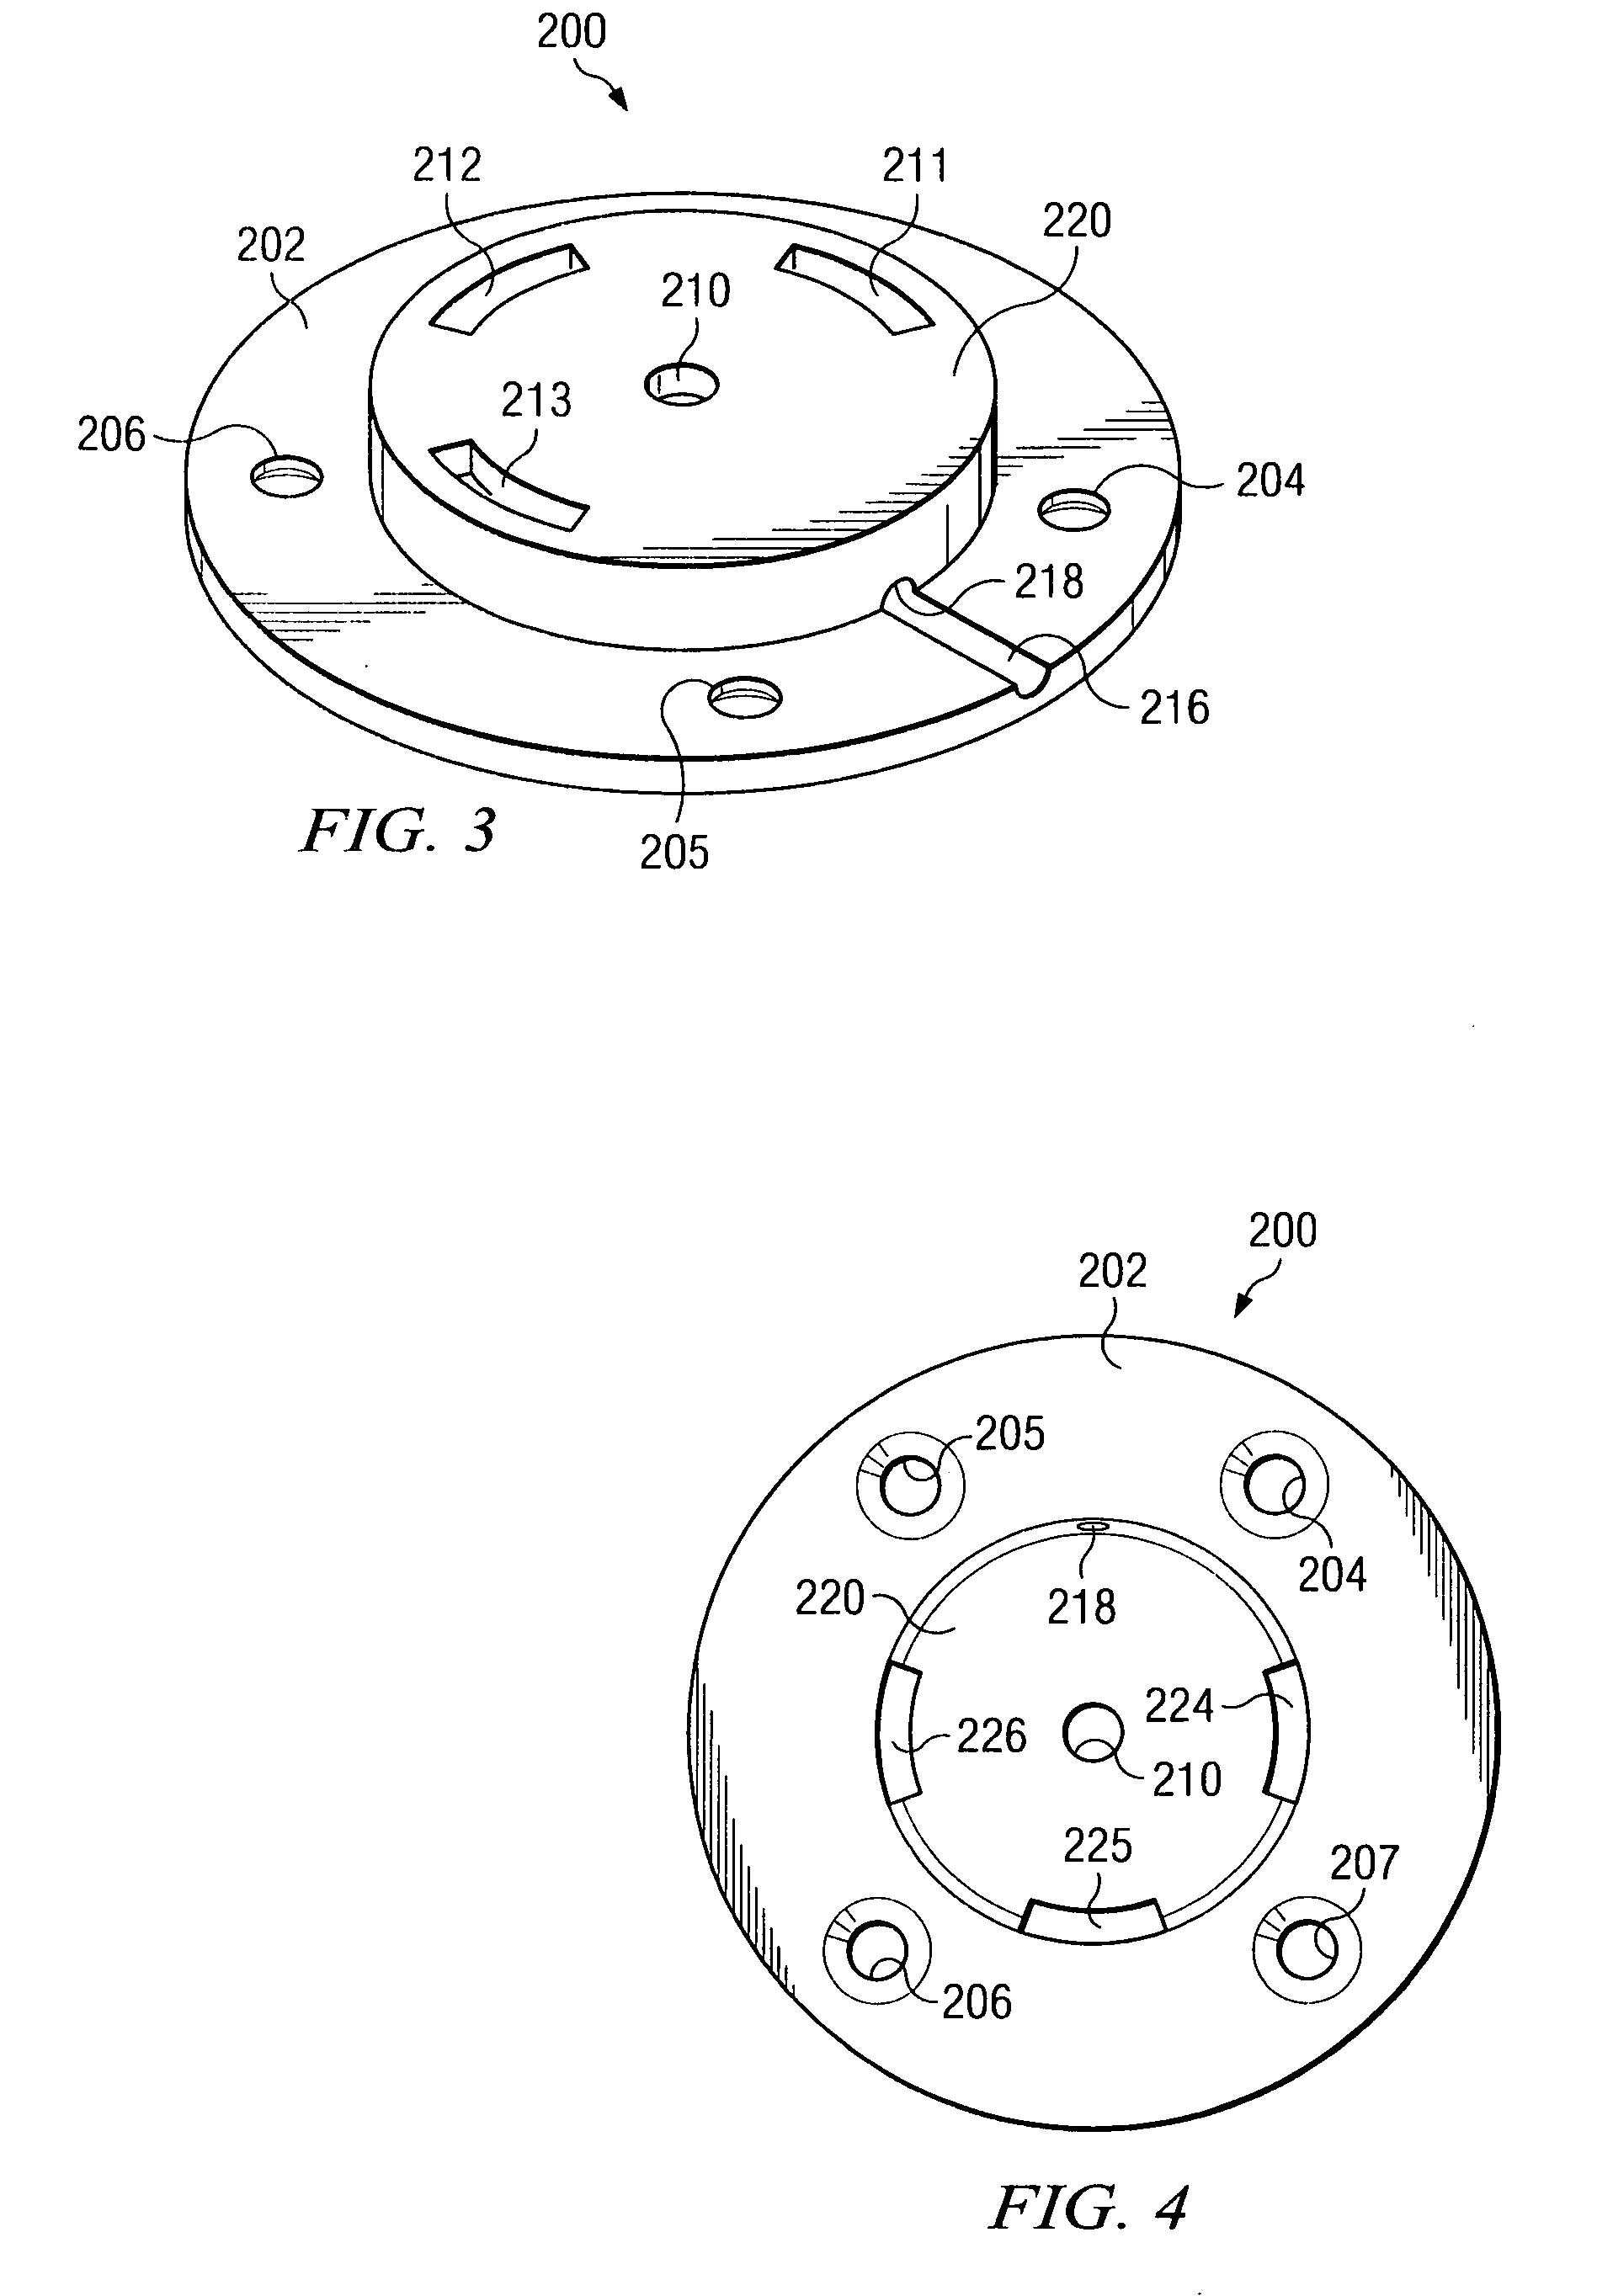 Bathroom fixture attachment device including a rotary coupling